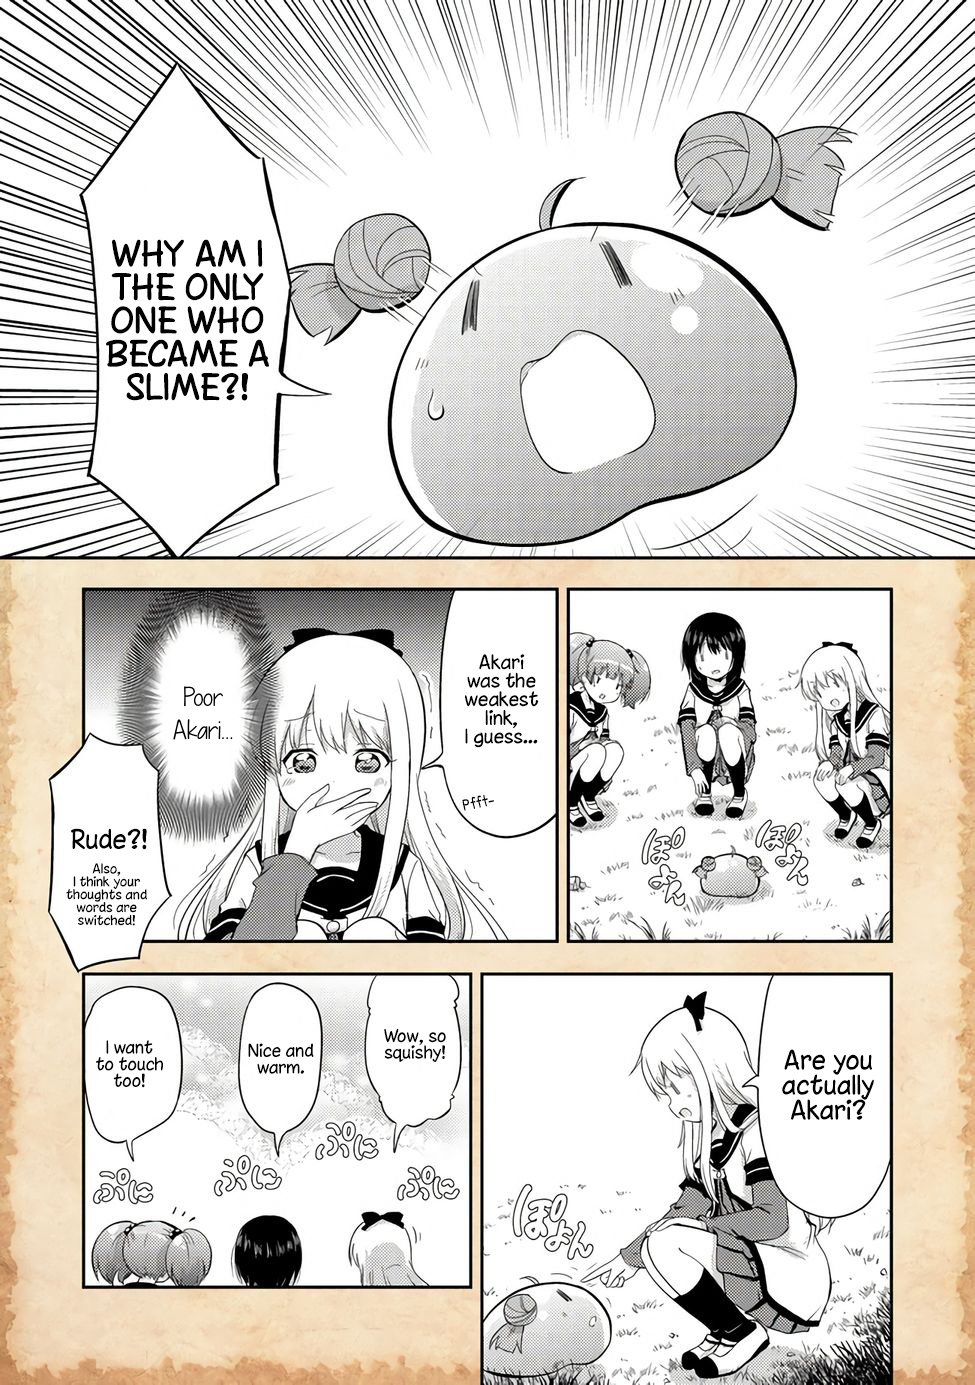 That Time Only Akari Got Reincarnated As A Slime - Page 2